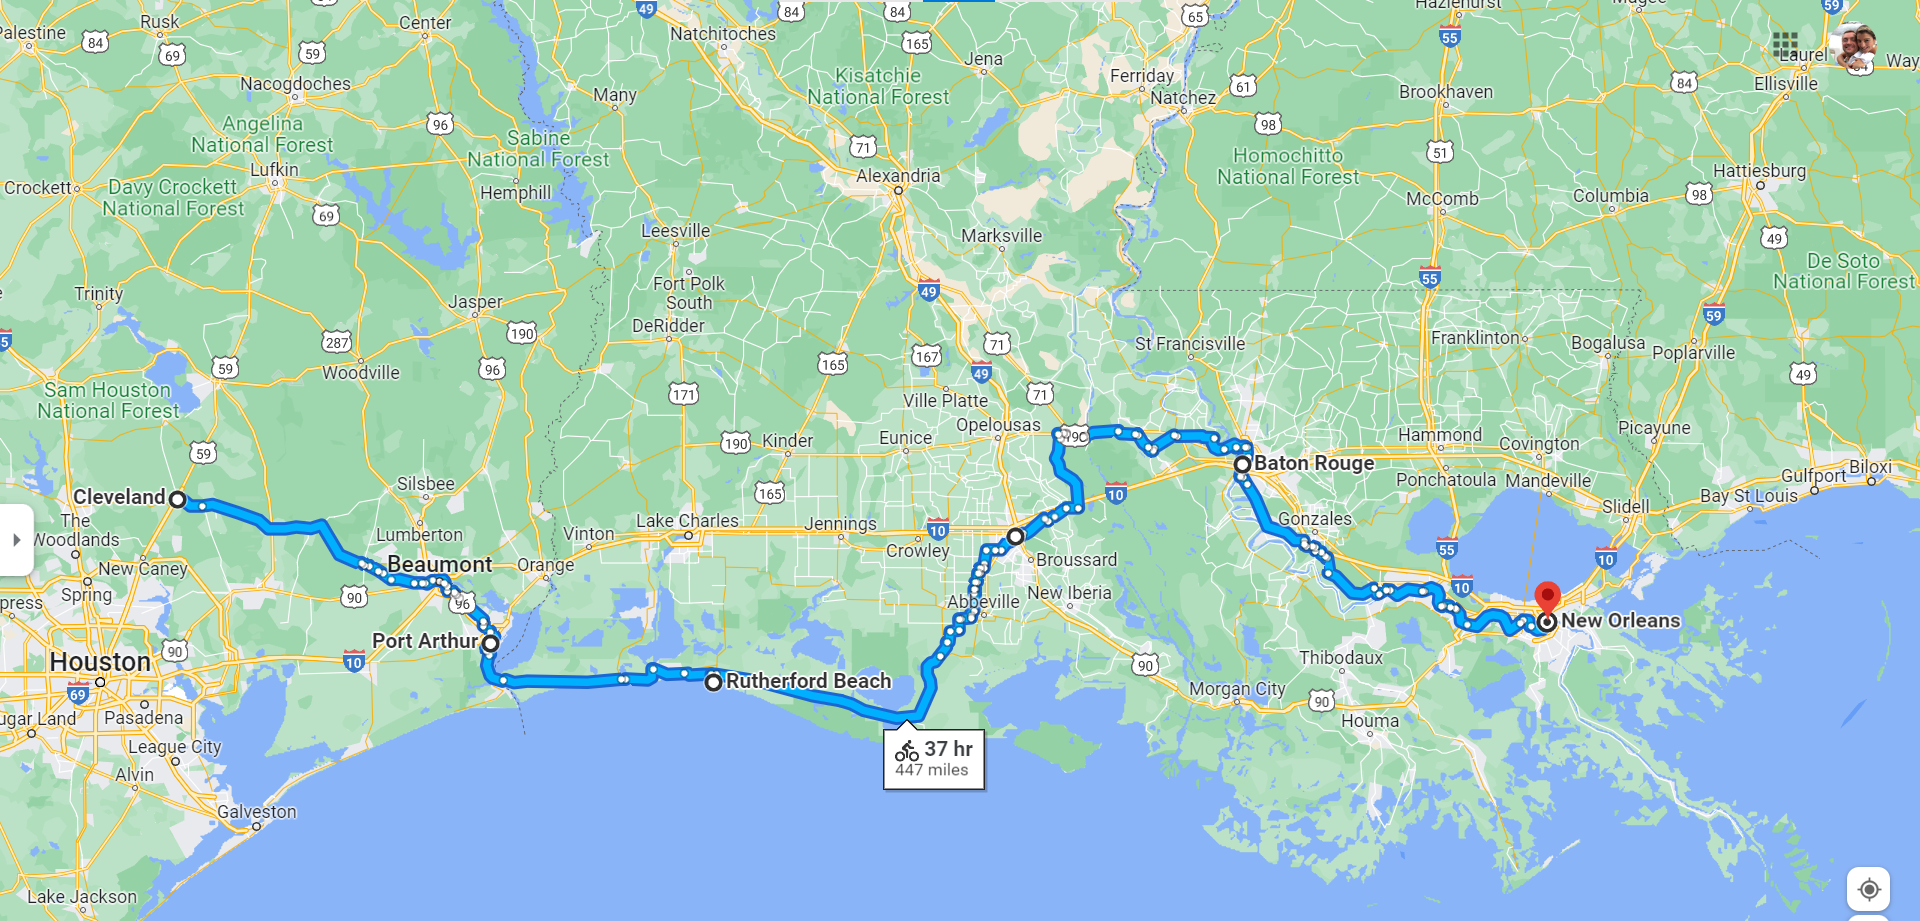 Cleveland to New Orleans (modified plan)